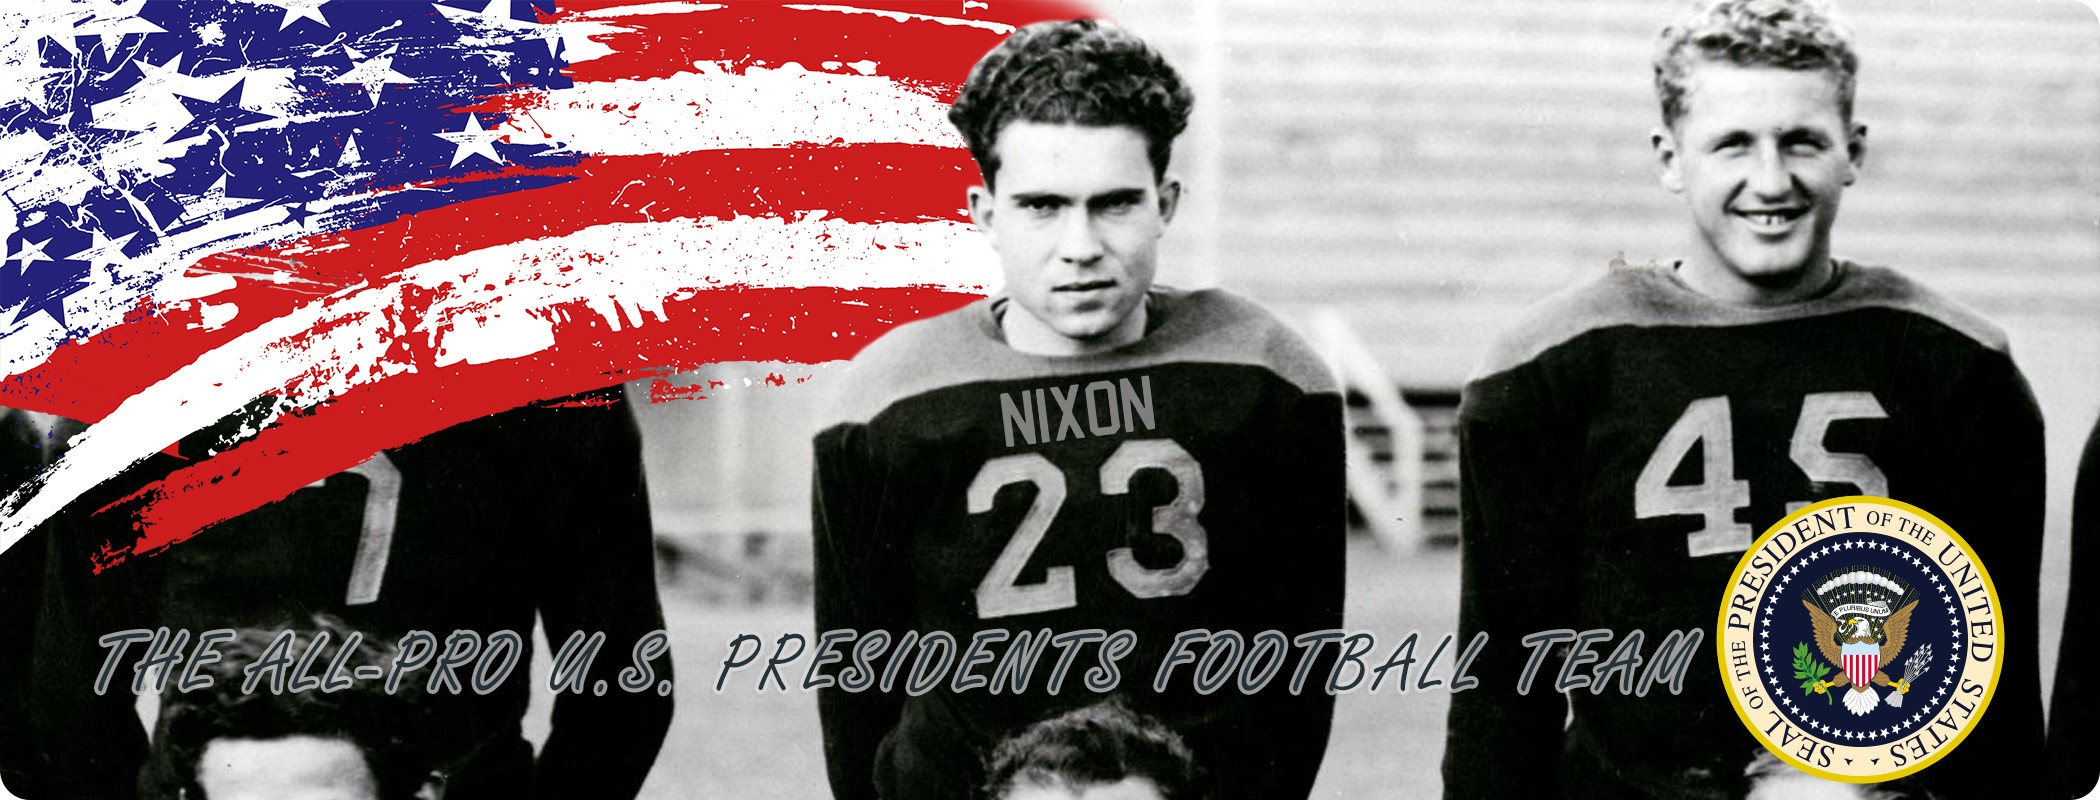 The All-Pro United States Presidents Football Team